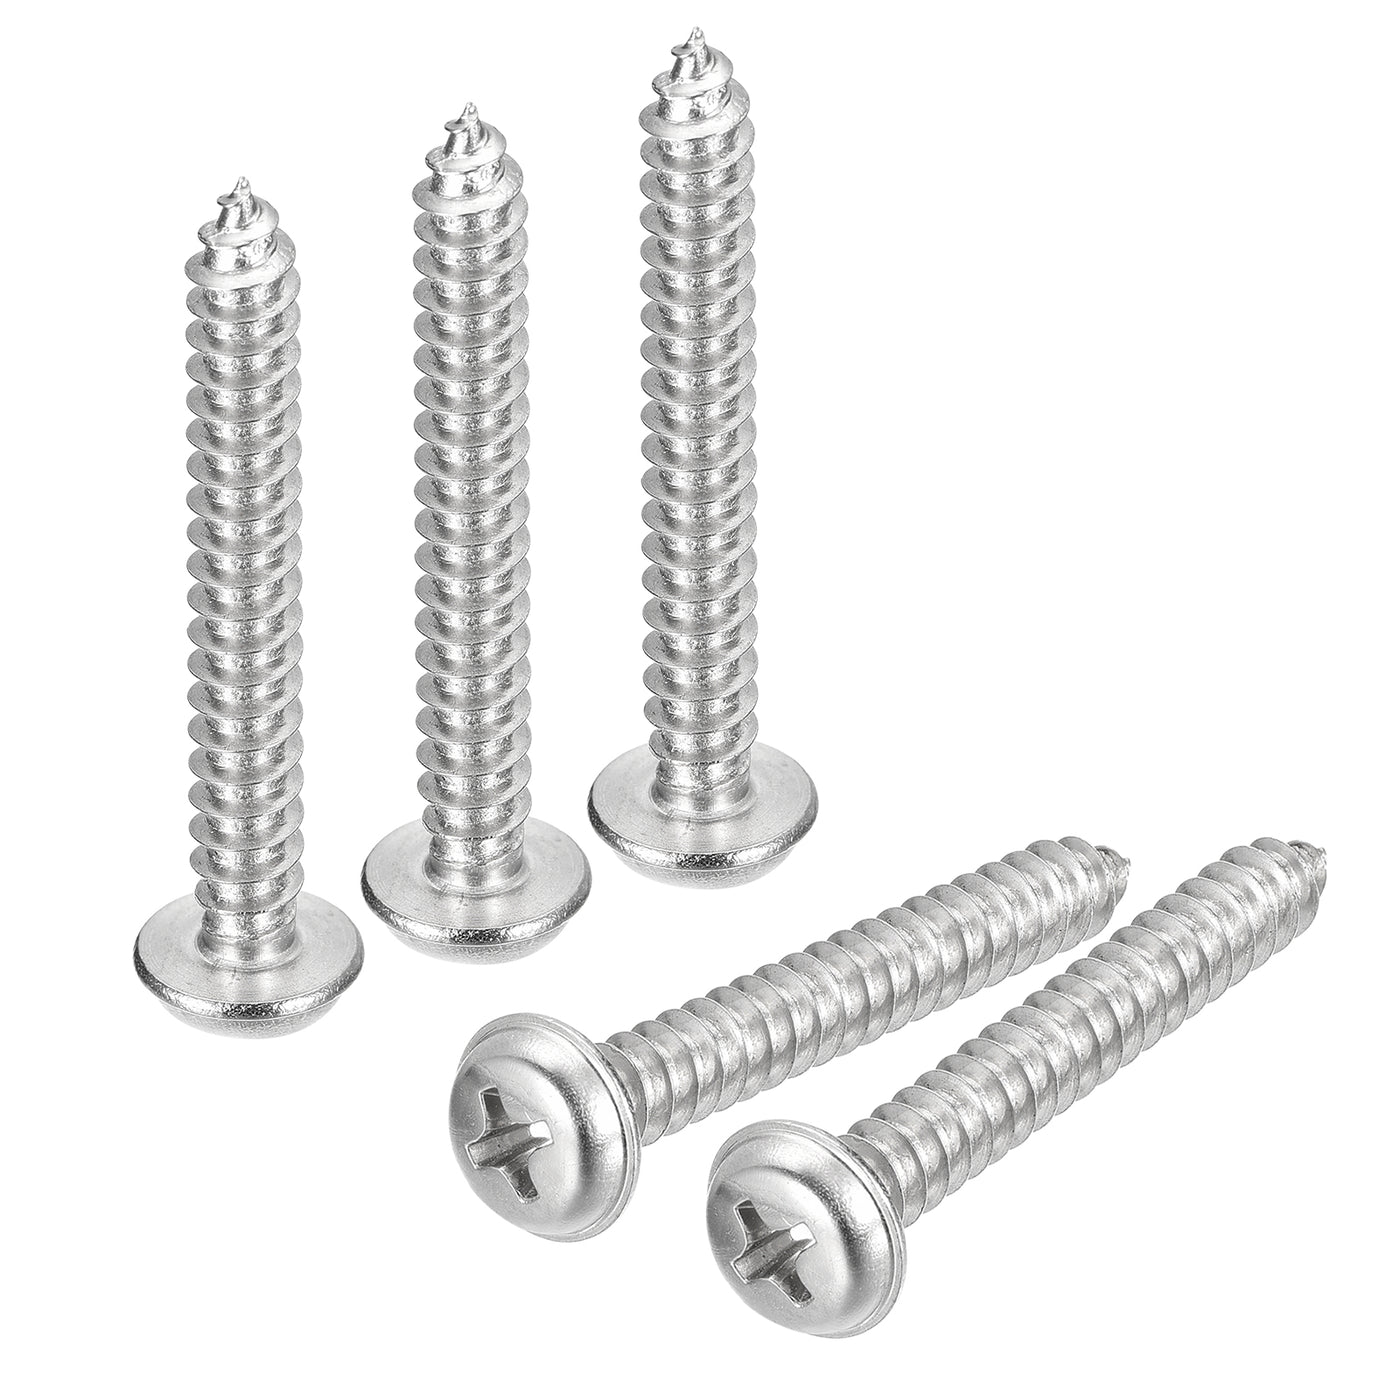 uxcell Uxcell ST5x35mm Phillips Pan Head Self-tapping Screw with Washer, 100pcs - 304 Stainless Steel Wood Screw Full Thread (Silver)